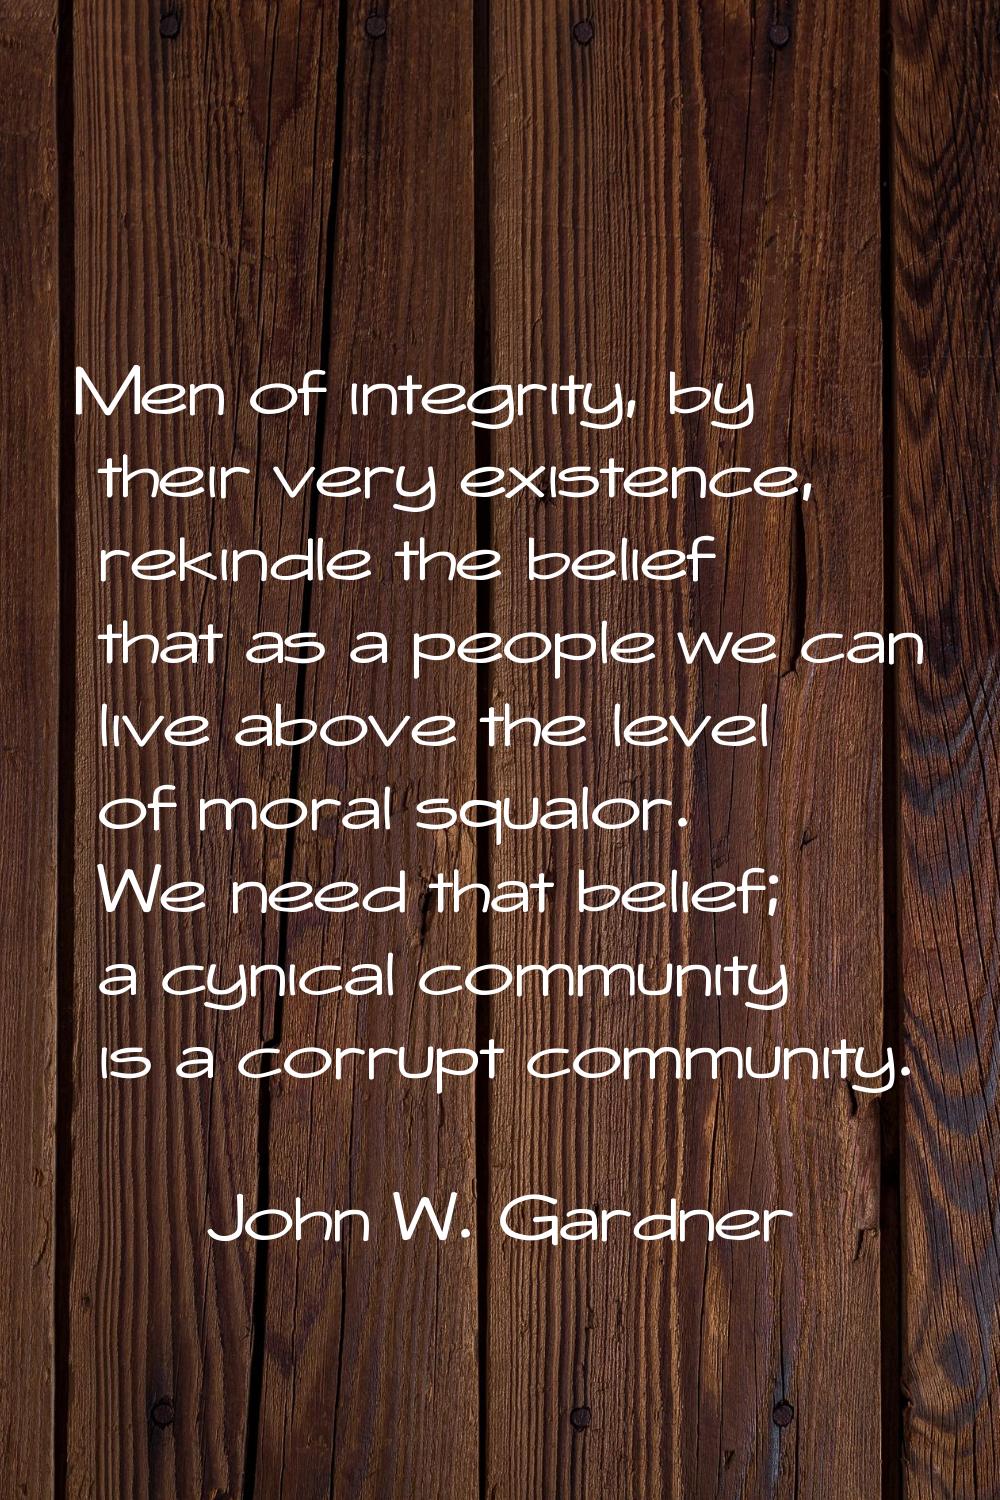 Men of integrity, by their very existence, rekindle the belief that as a people we can live above t